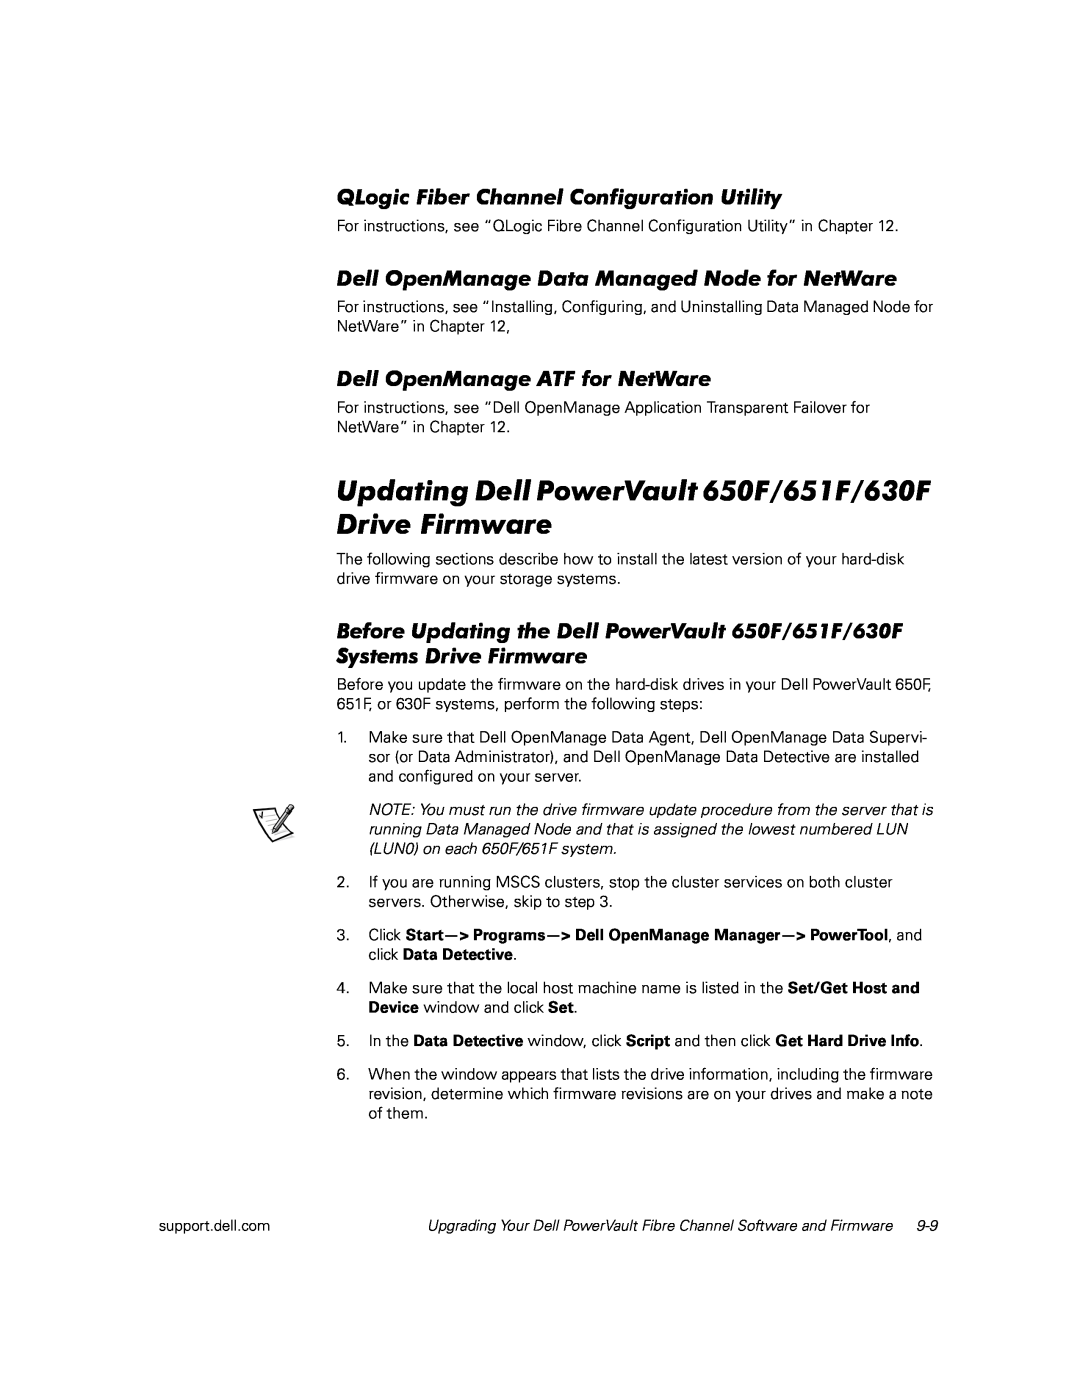 Dell manual Updating Dell PowerVault 650F/651F/630F Drive Firmware, QLogic Fiber Channel Configuration Utility 